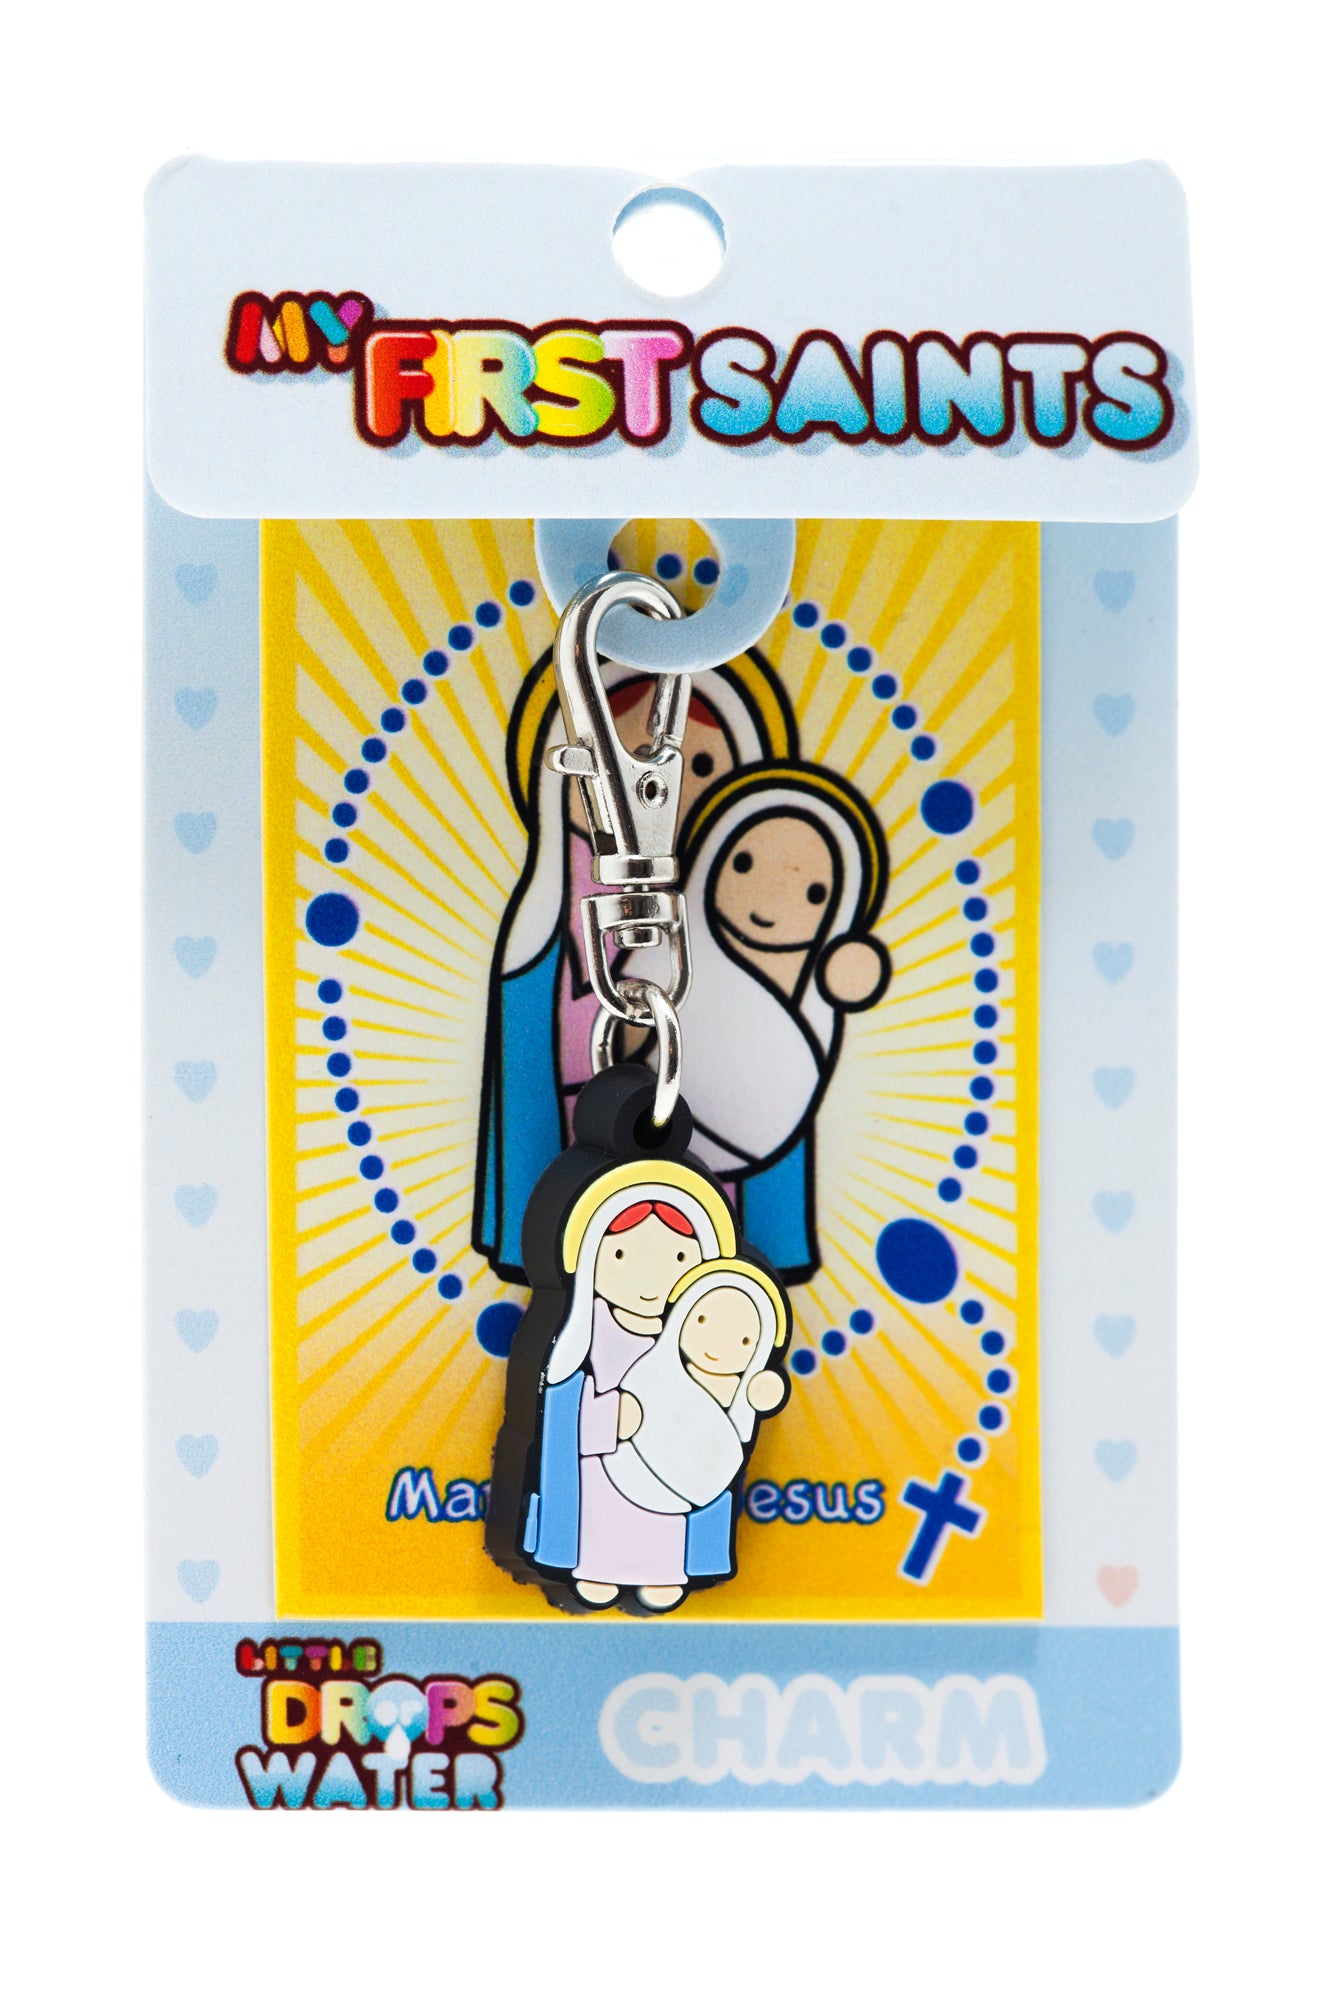 Mary and Baby Jesus charm